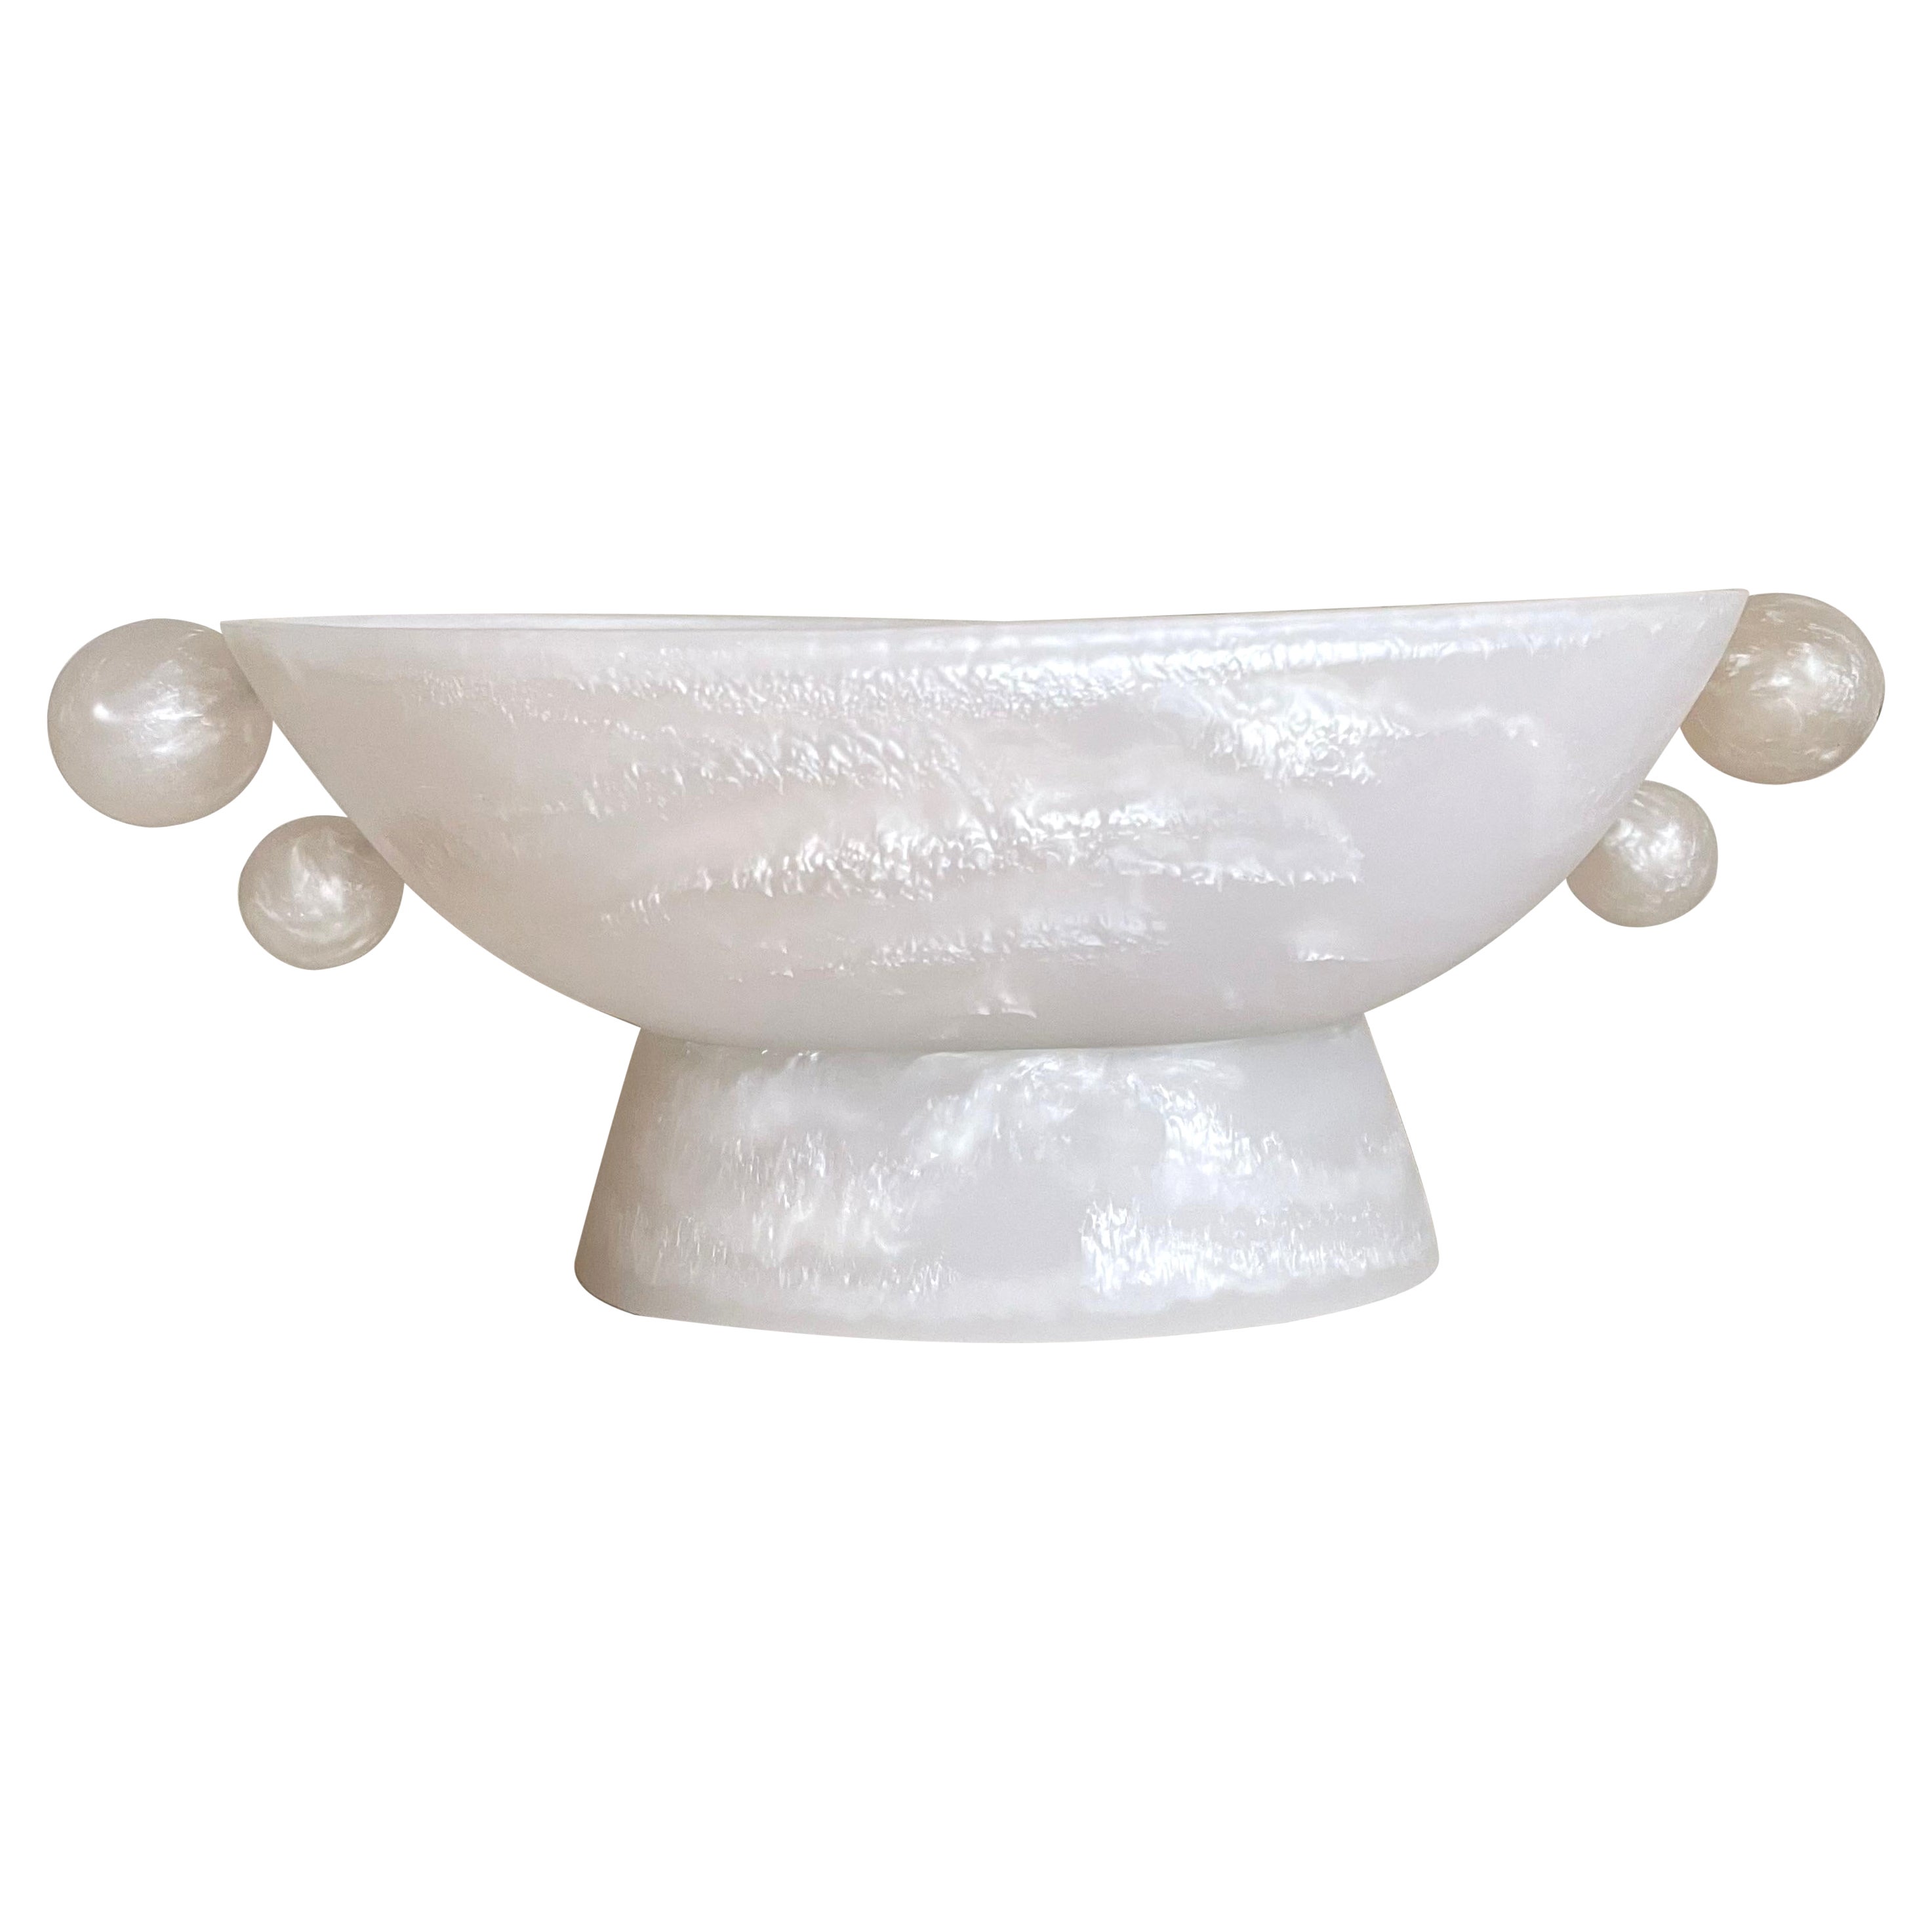 Oval Pedestal Resin Bowl, White and Pearl by Paola Valle